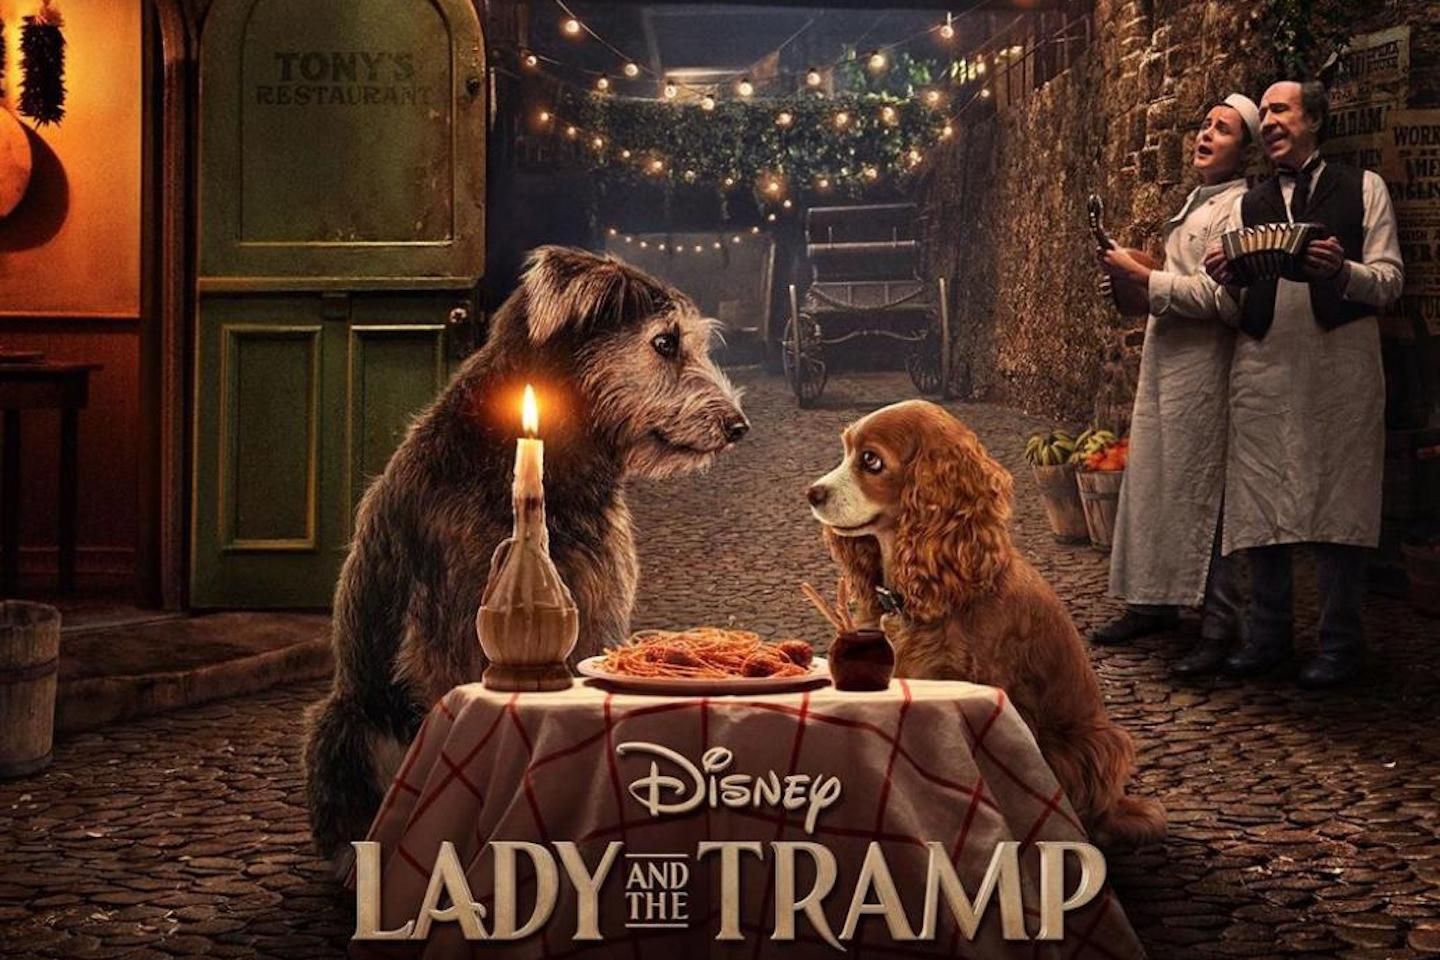 Lady and the Tramp, Romantic comedy, canine stars, Walt Disney